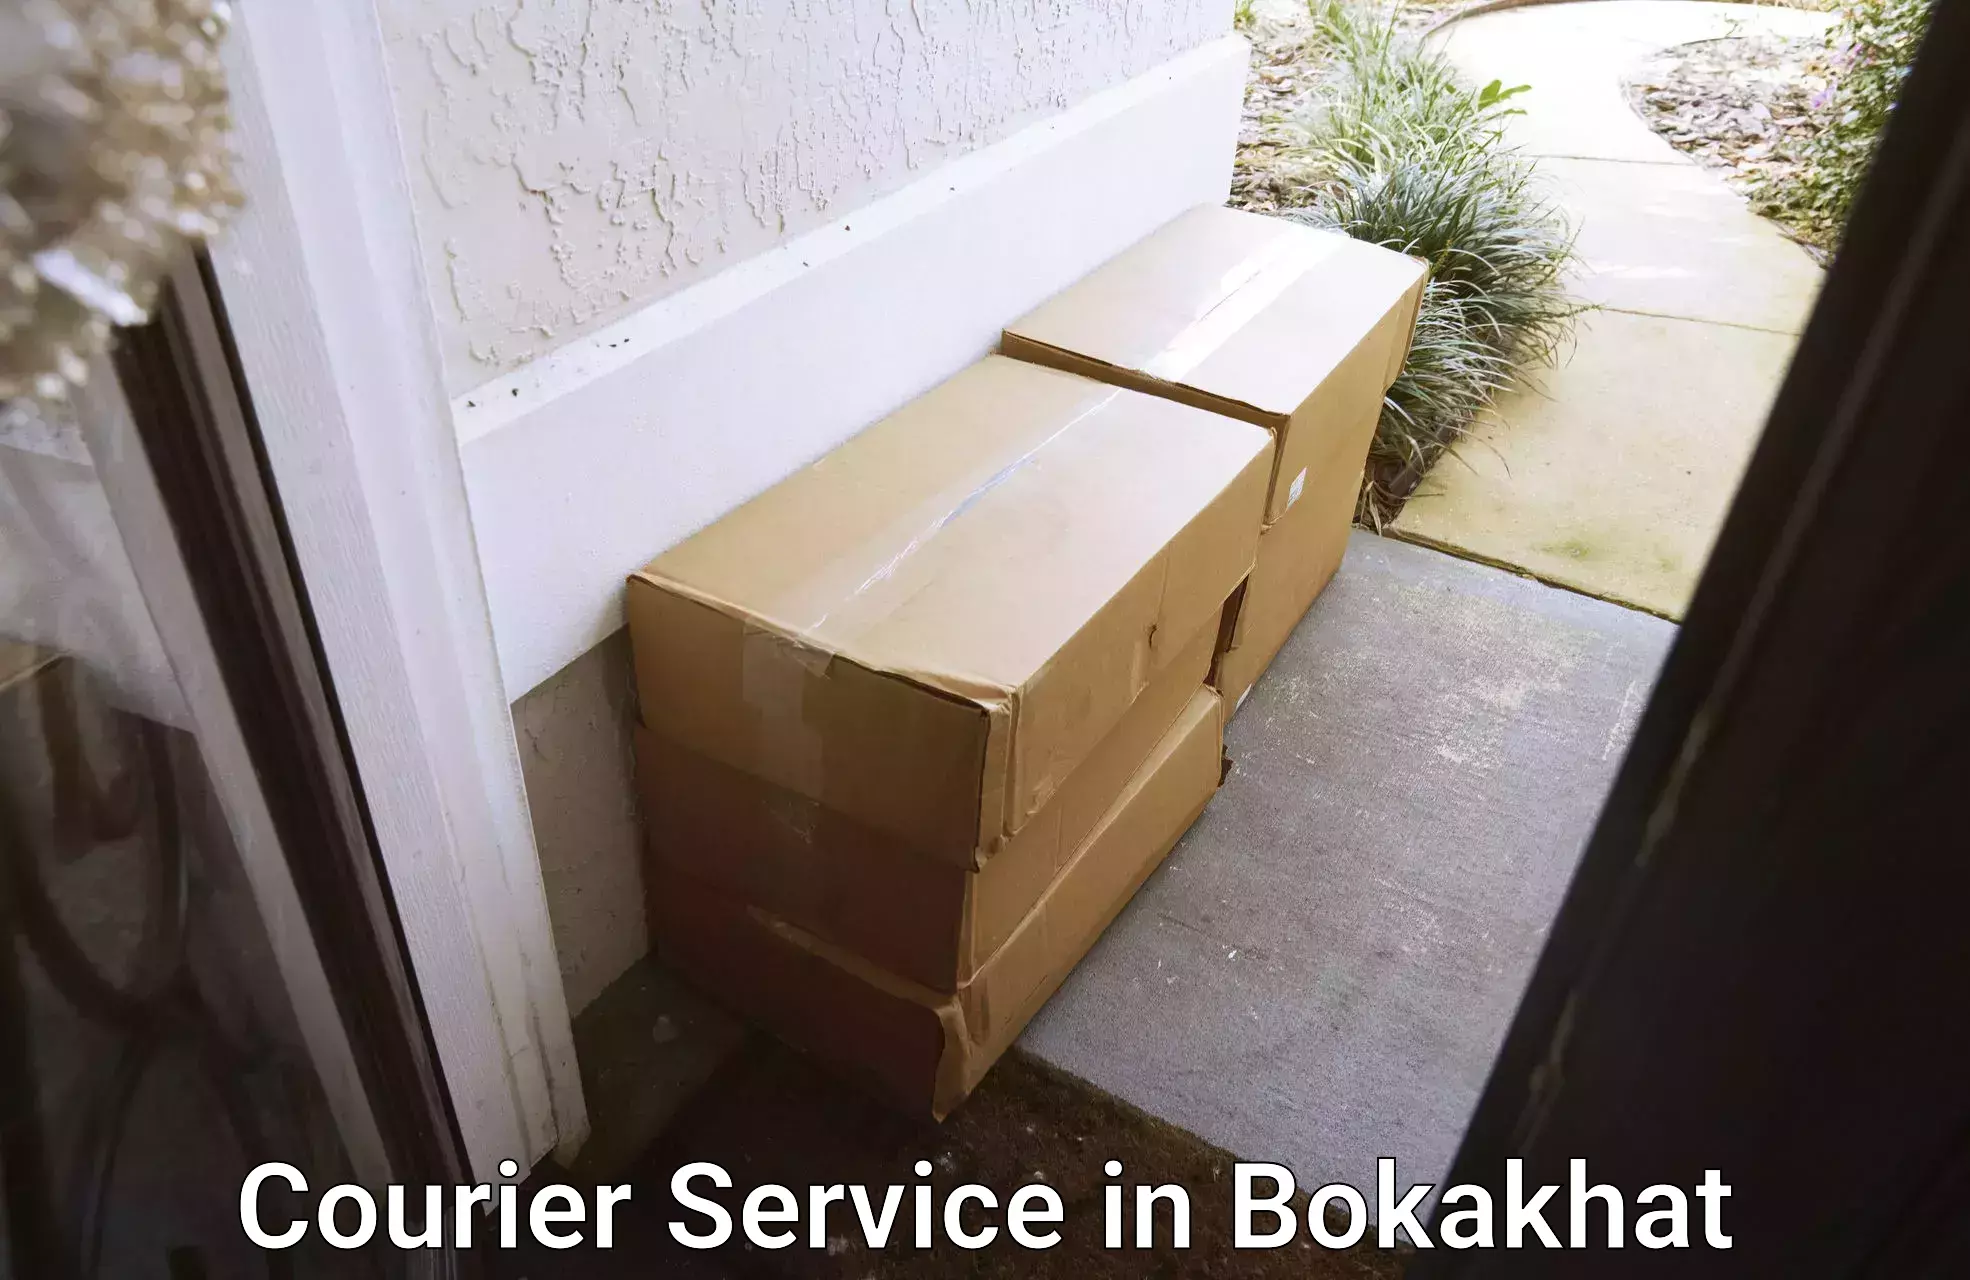 High-quality delivery services in Bokakhat